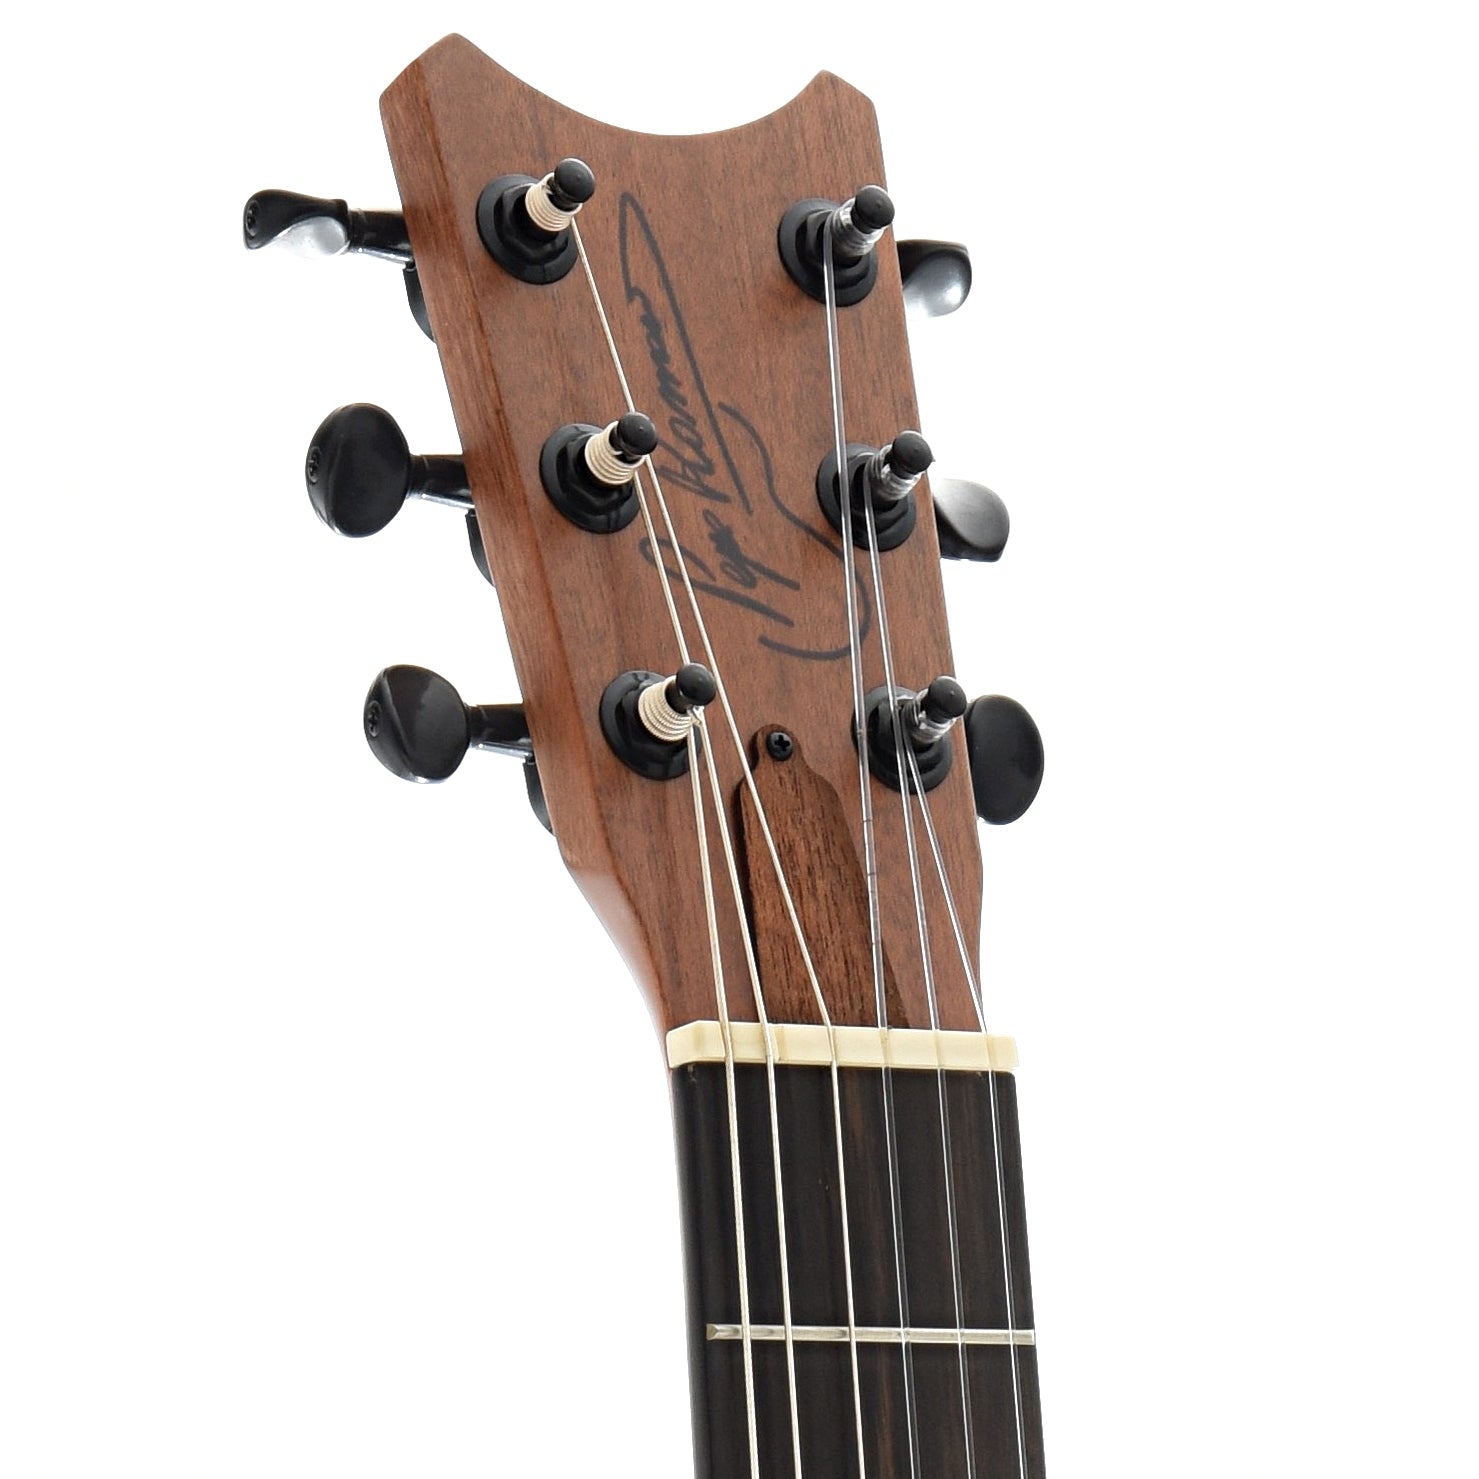 Image 6 of Romero Creations Pepe Romero, SR. Signature Model, Solid Spruce and Mahogany, with Case - SKU# RPR6SM : Product Type Classical & Flamenco Guitars : Elderly Instruments